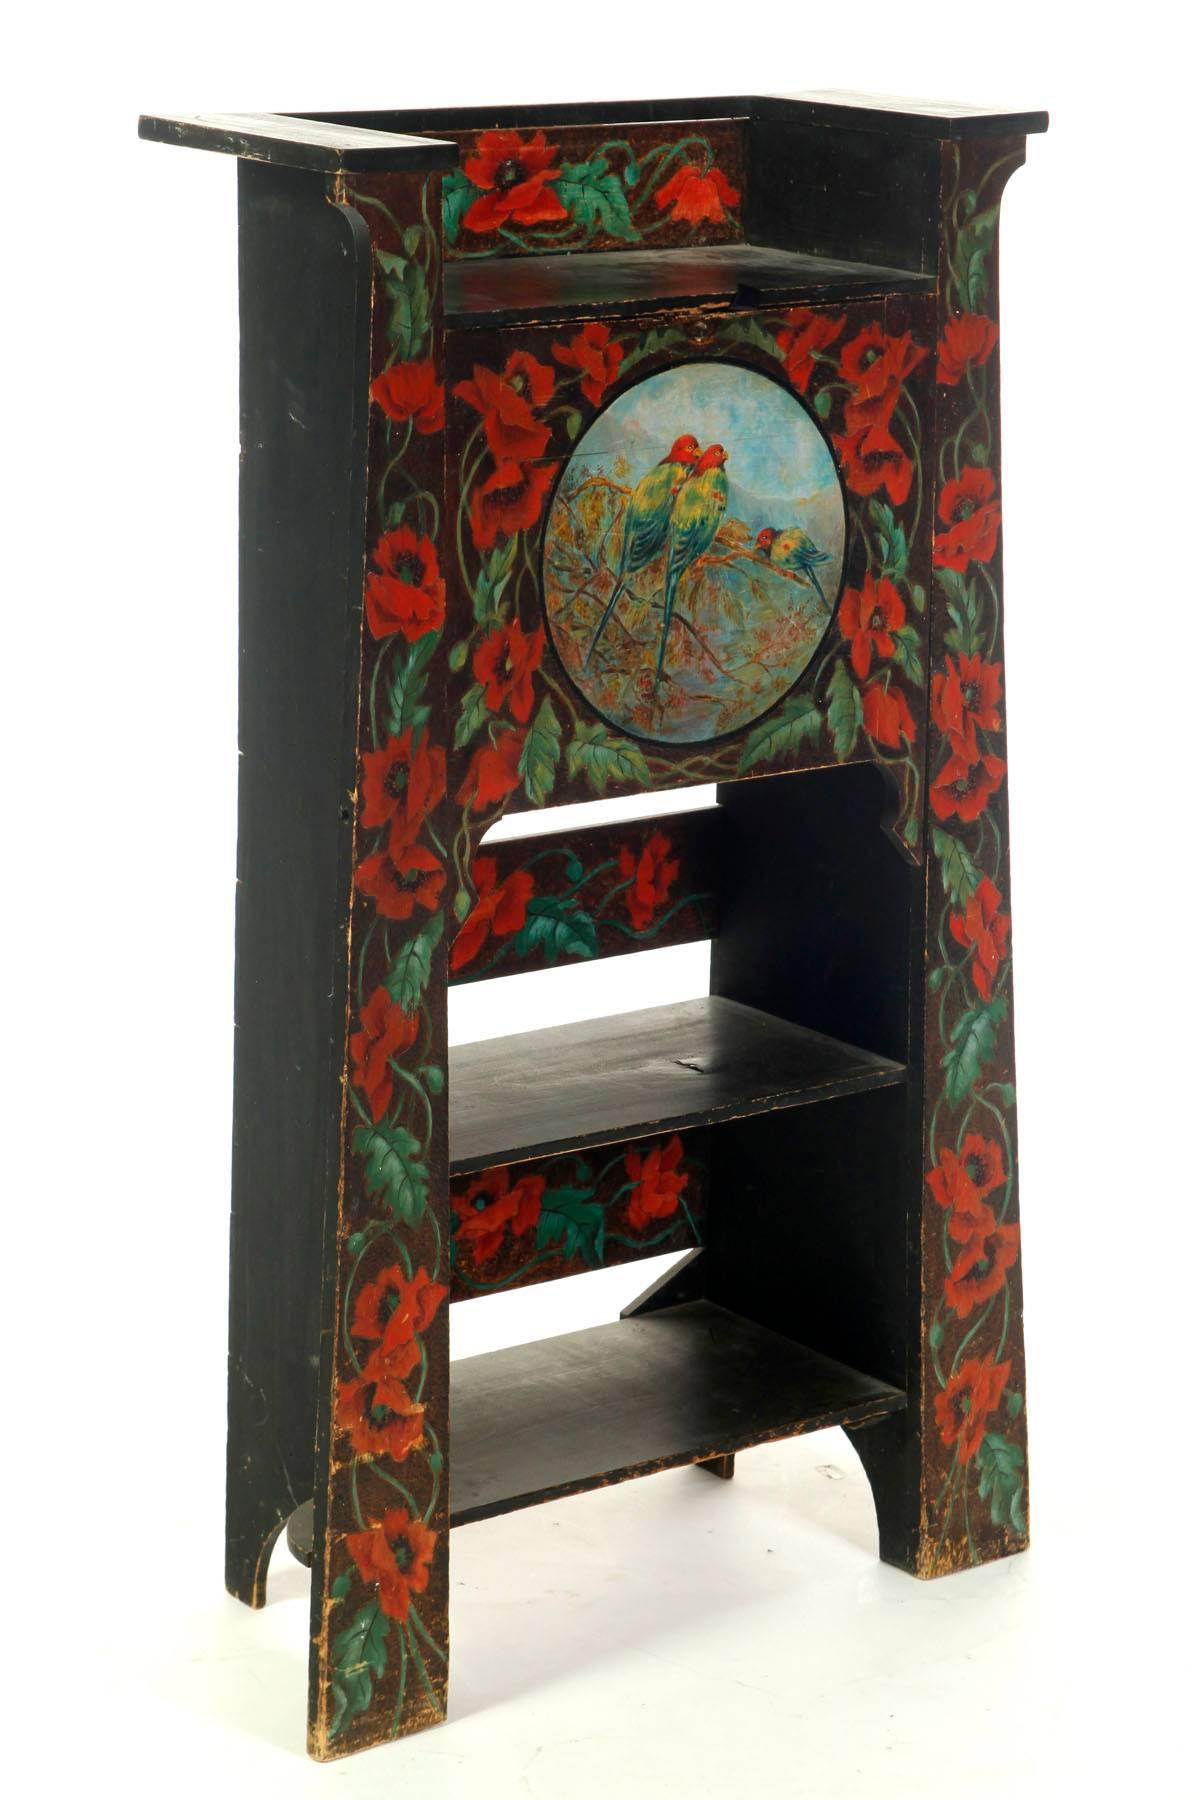 20th Century American Antique Hand-Painted  Birds and Poppies Desk For Sale